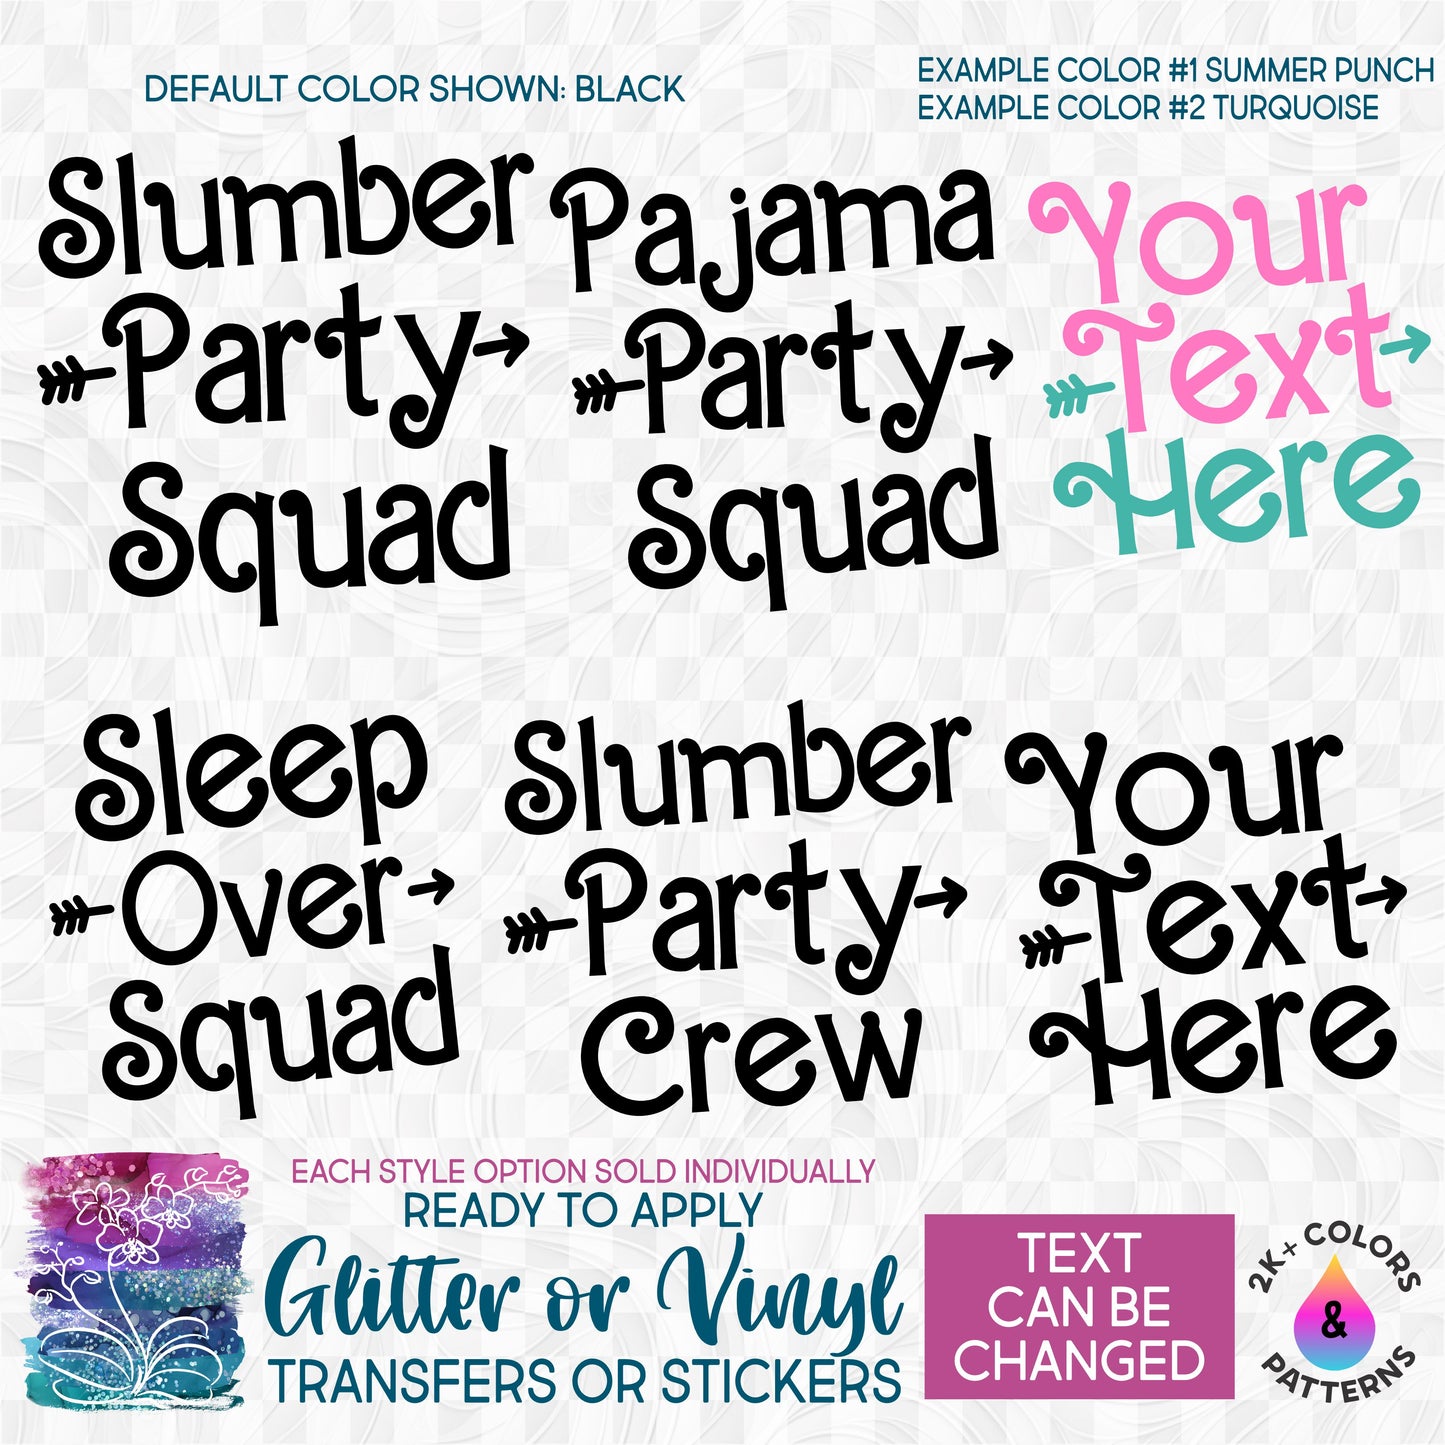 (s217-F) Slumber Party, Sleep Over, Pajama Party, Squad Glitter or Vinyl Iron-On Transfer or Sticker